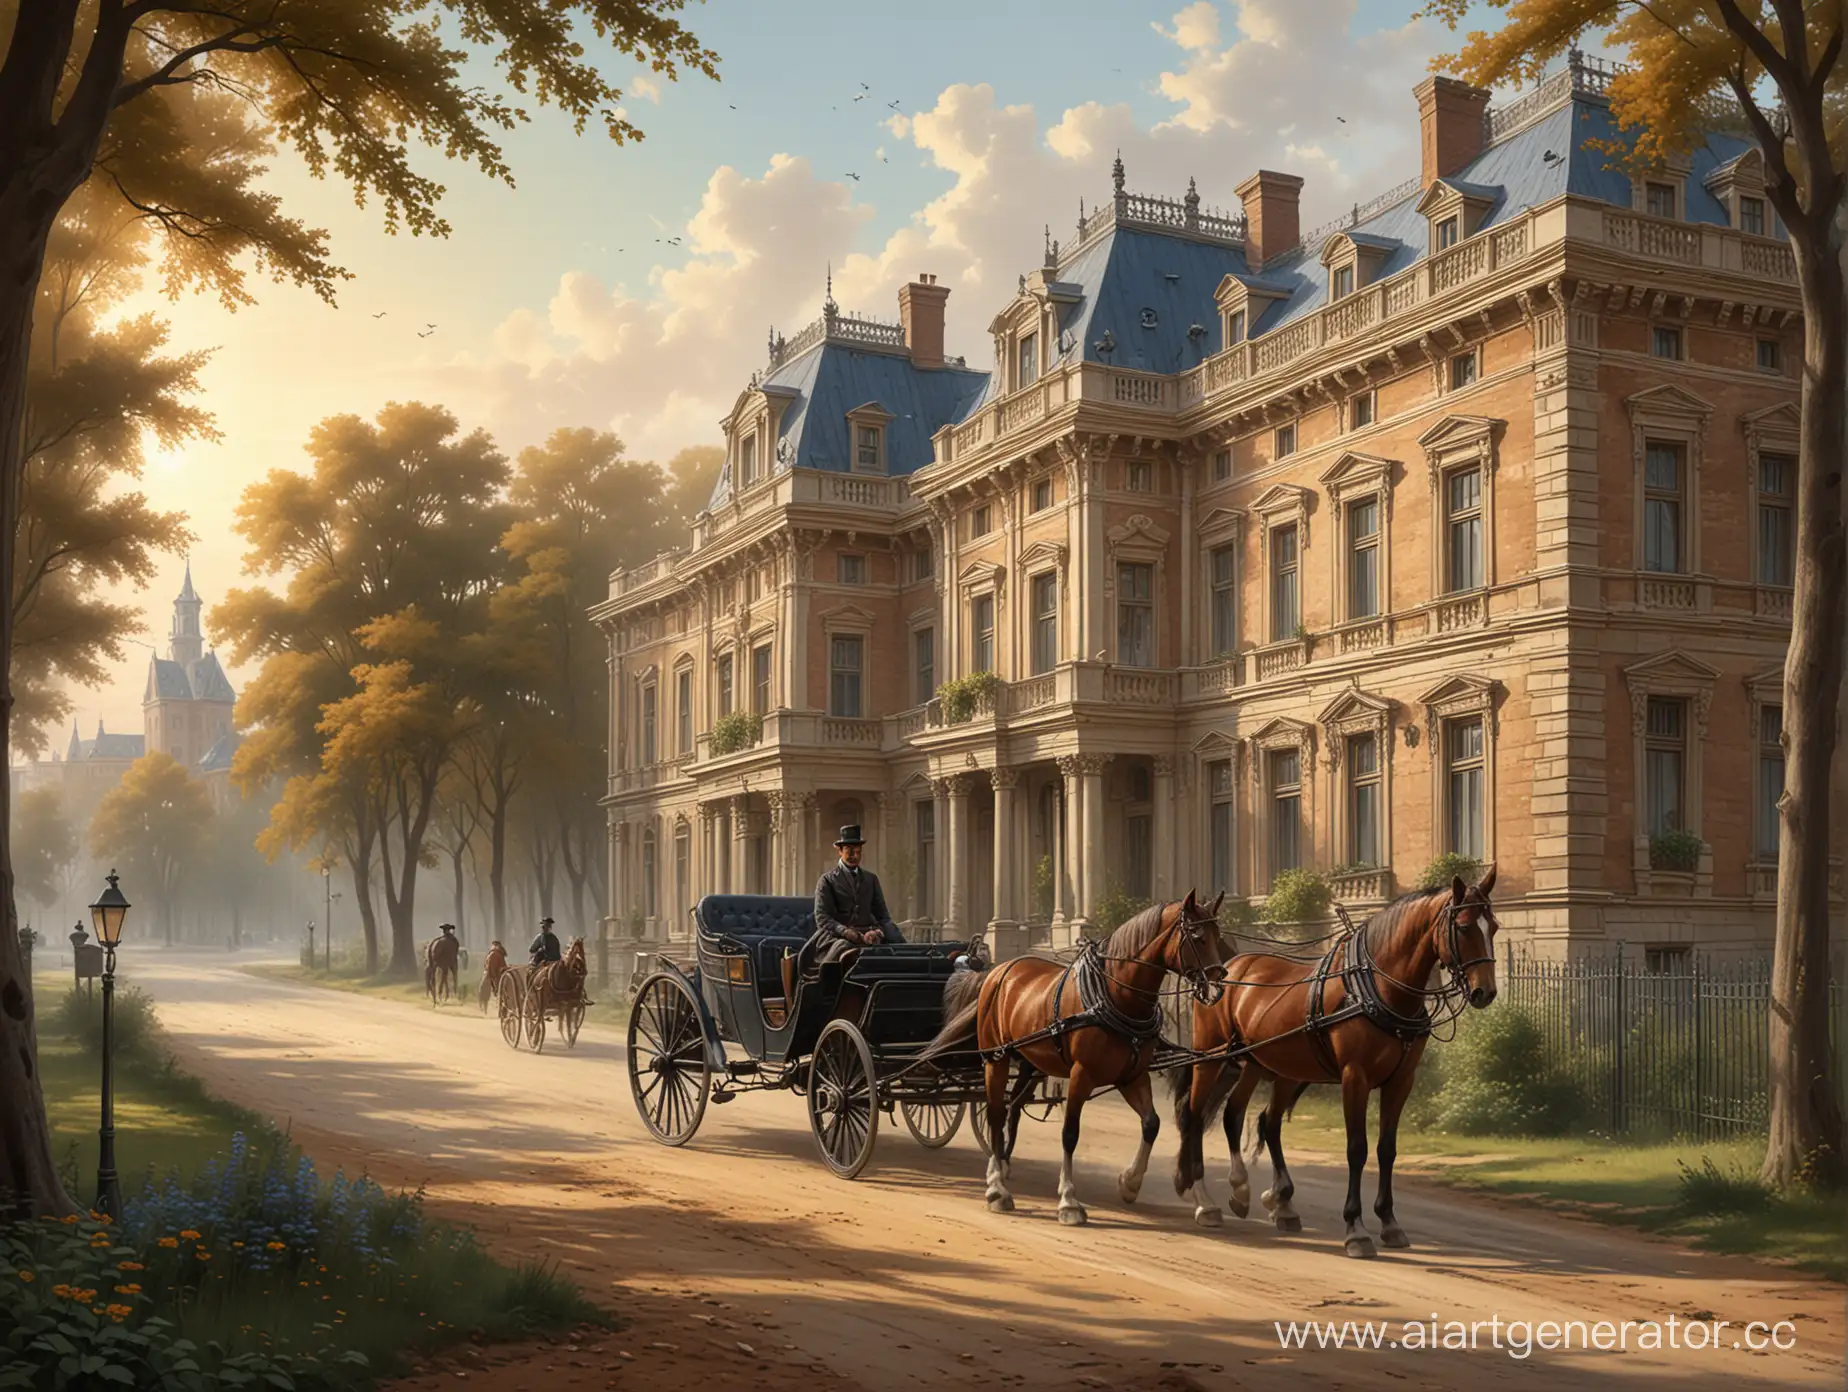 An illustration that conveys the atmosphere of 19th century using elements of such an era. The image should depict a horse harnessed to a carriage, as well as the road it travels along, and a mansion in a luxurious style typical of that time. The horse should be depicted with a harnessed harness, expressing movement along the road. The carriage should be made in a style typical of the 19th century, with decorative elements and ornaments. The road should have relief features reflecting its use and the passage of various vehicles. The mansion should be presented as majestic and luxurious, with the style of architecture typical of Russian estates of the 19th century, such as columns, balconies and towers. The atmosphere of the illustration should be warm and cozy, with shades of dark blue and brown, which are characteristic of this era. Add elements of nature such as trees and bushes to give the image a lively and natural setting. Please provide high quality images with details to highlight the atmosphere and style of the 19th century. The goal is to create an illustration that captures the spirit and aesthetics of this historical era, conveying its beauty and sophistication.